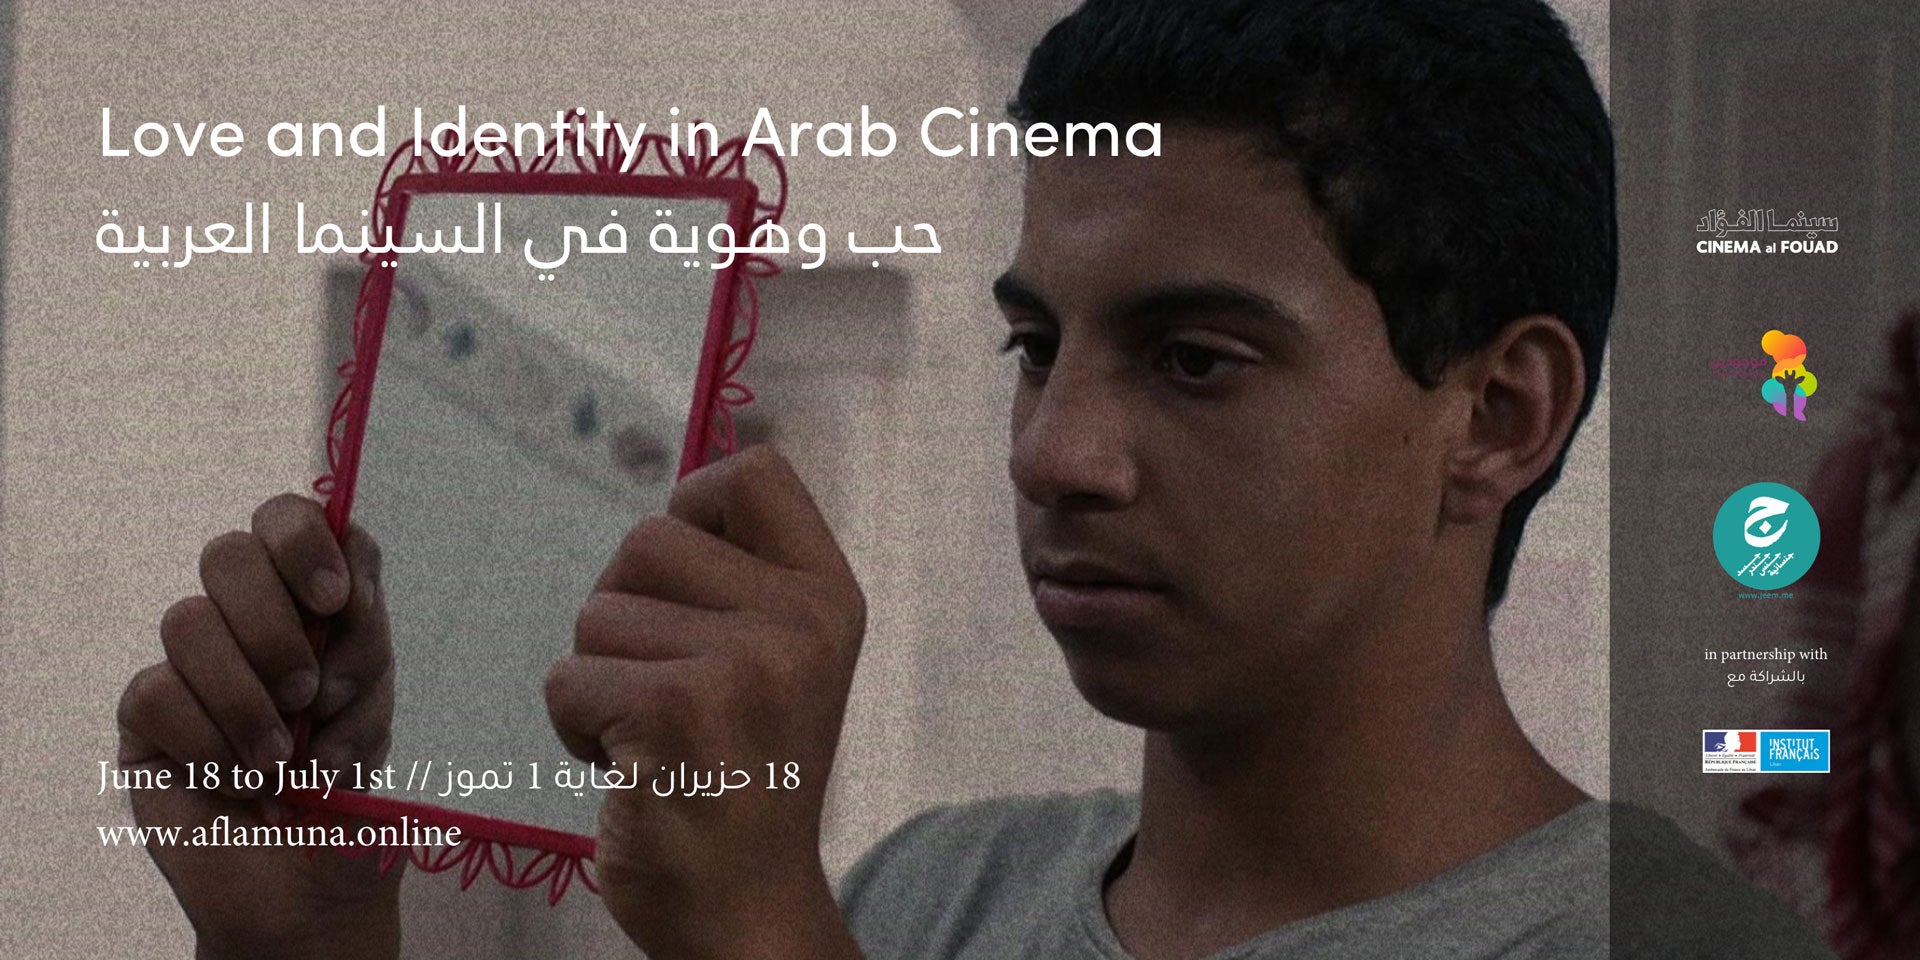 Portrait of protagonist from the Moroccan queer film Salvation Army by Abdellah Taïa.